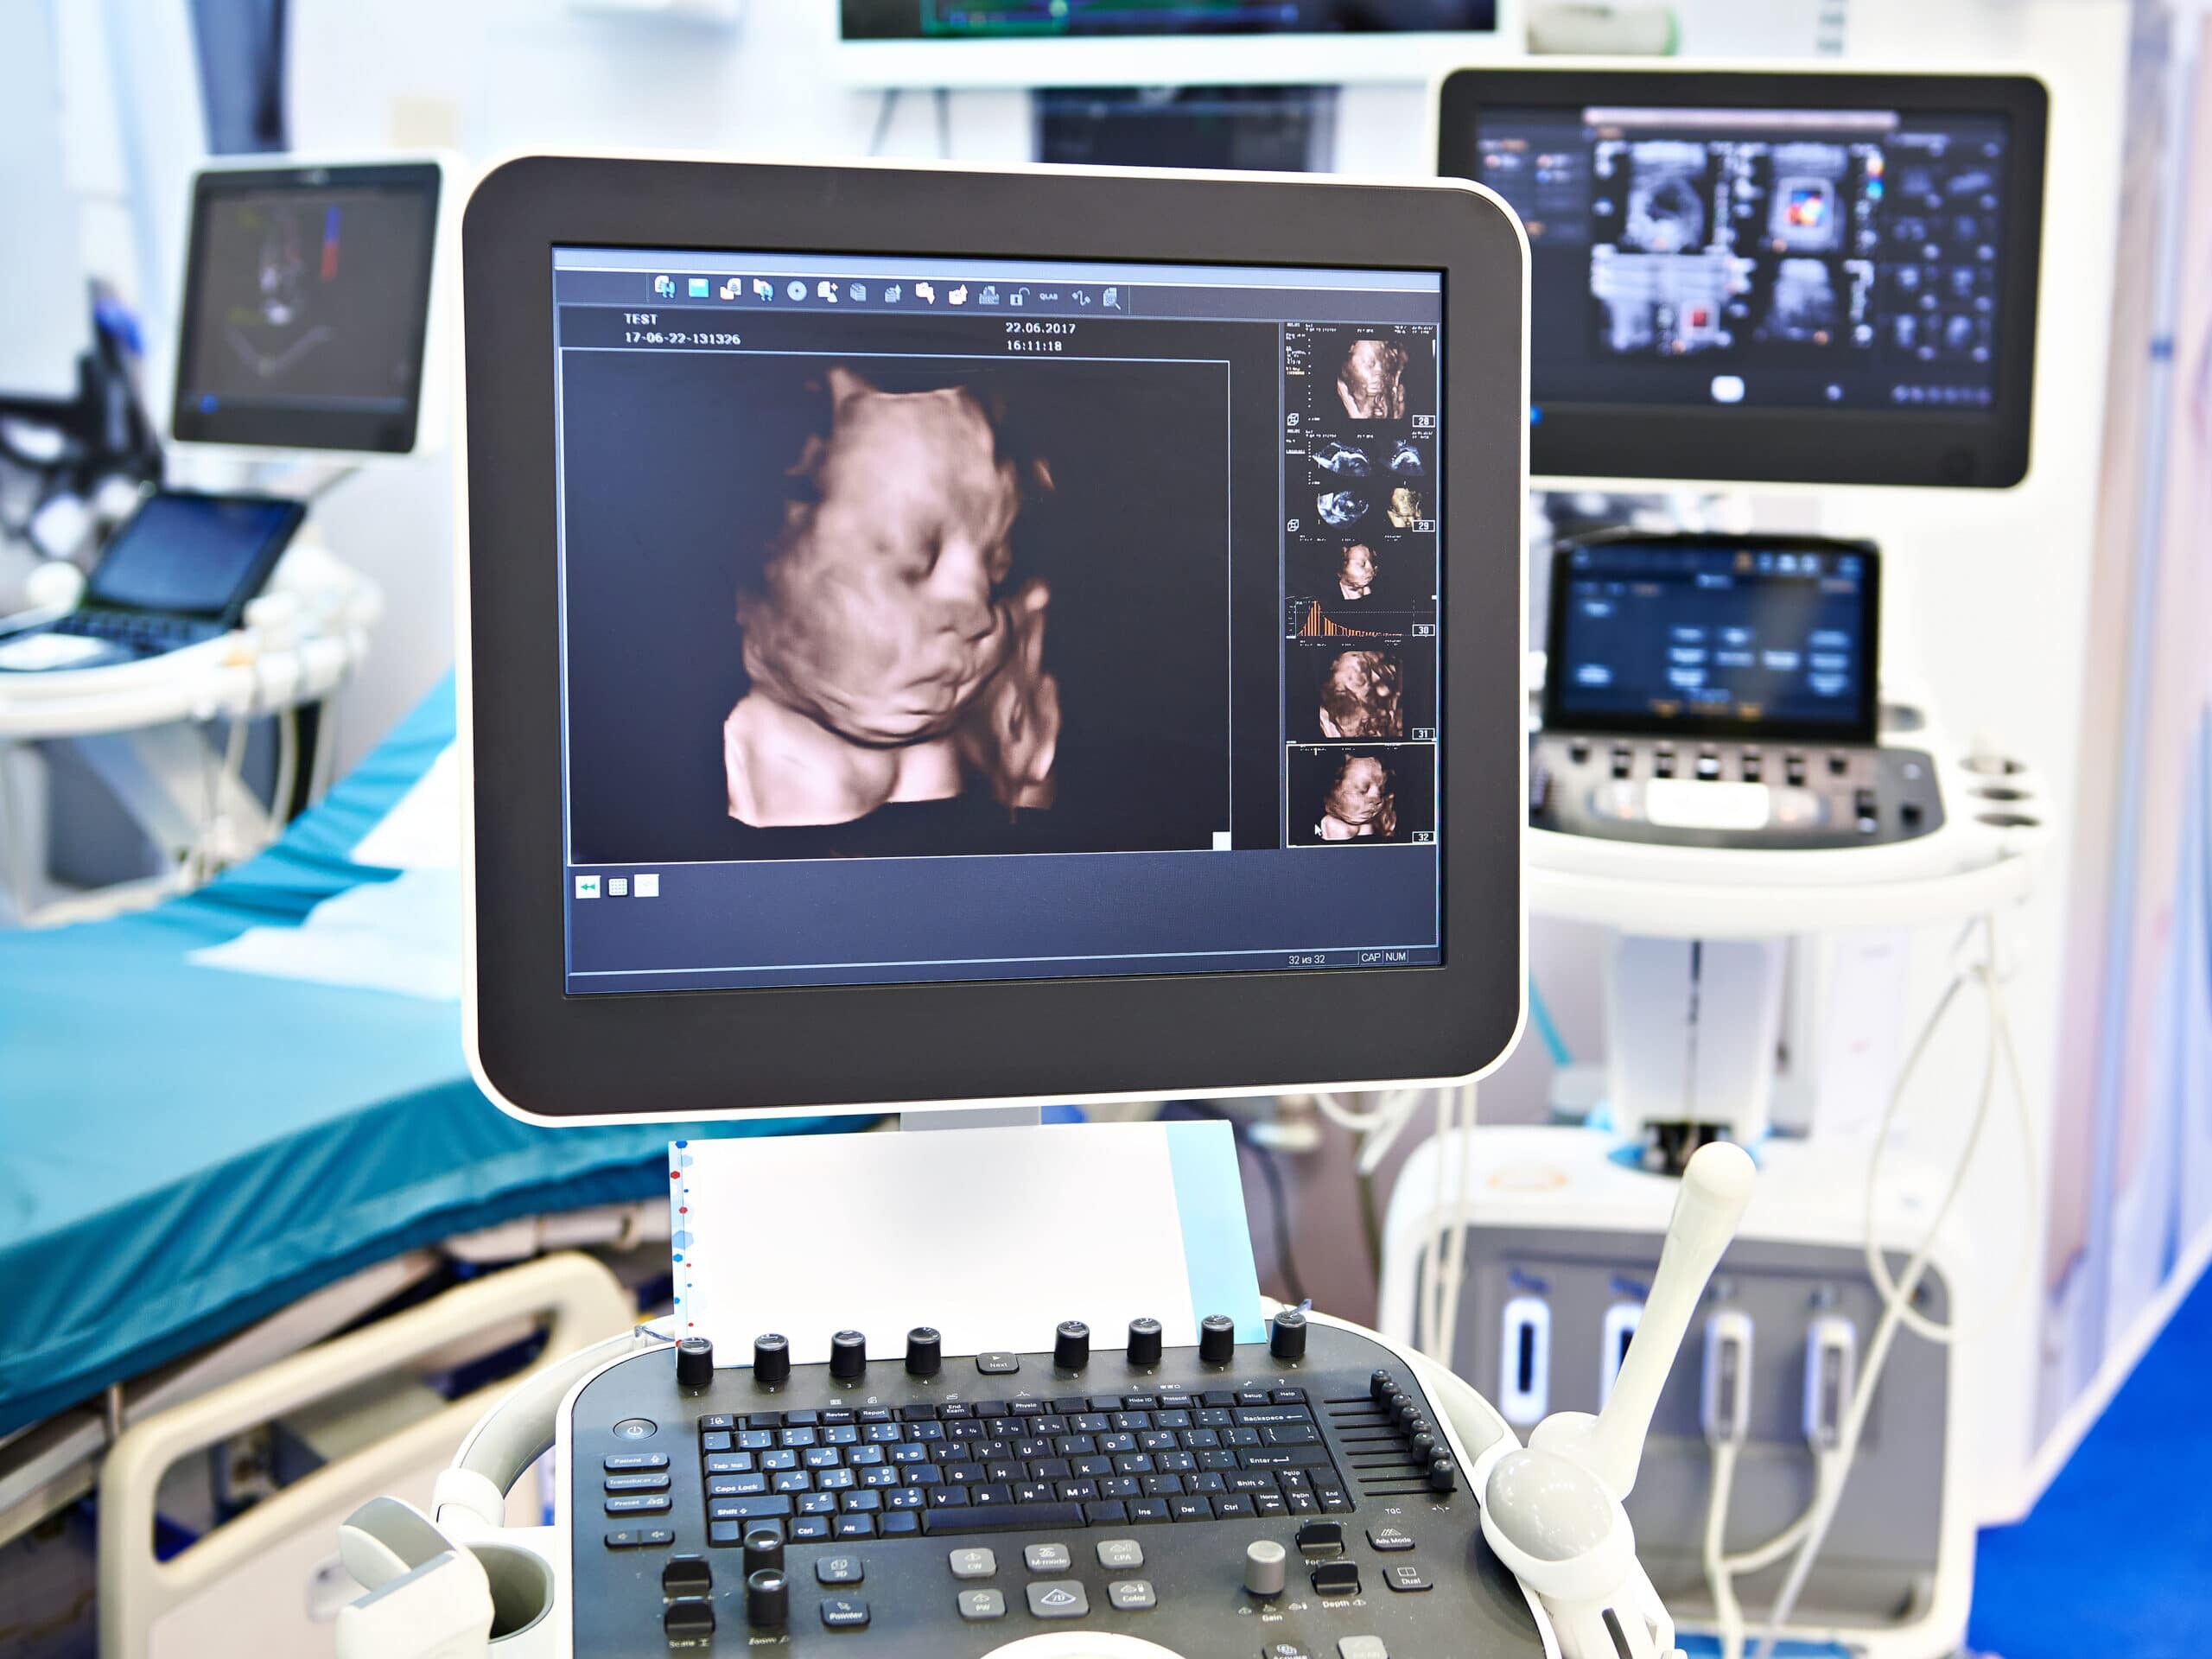 Ultrasonography, Ultrasonography is ultrasound imaging used in medical procedures